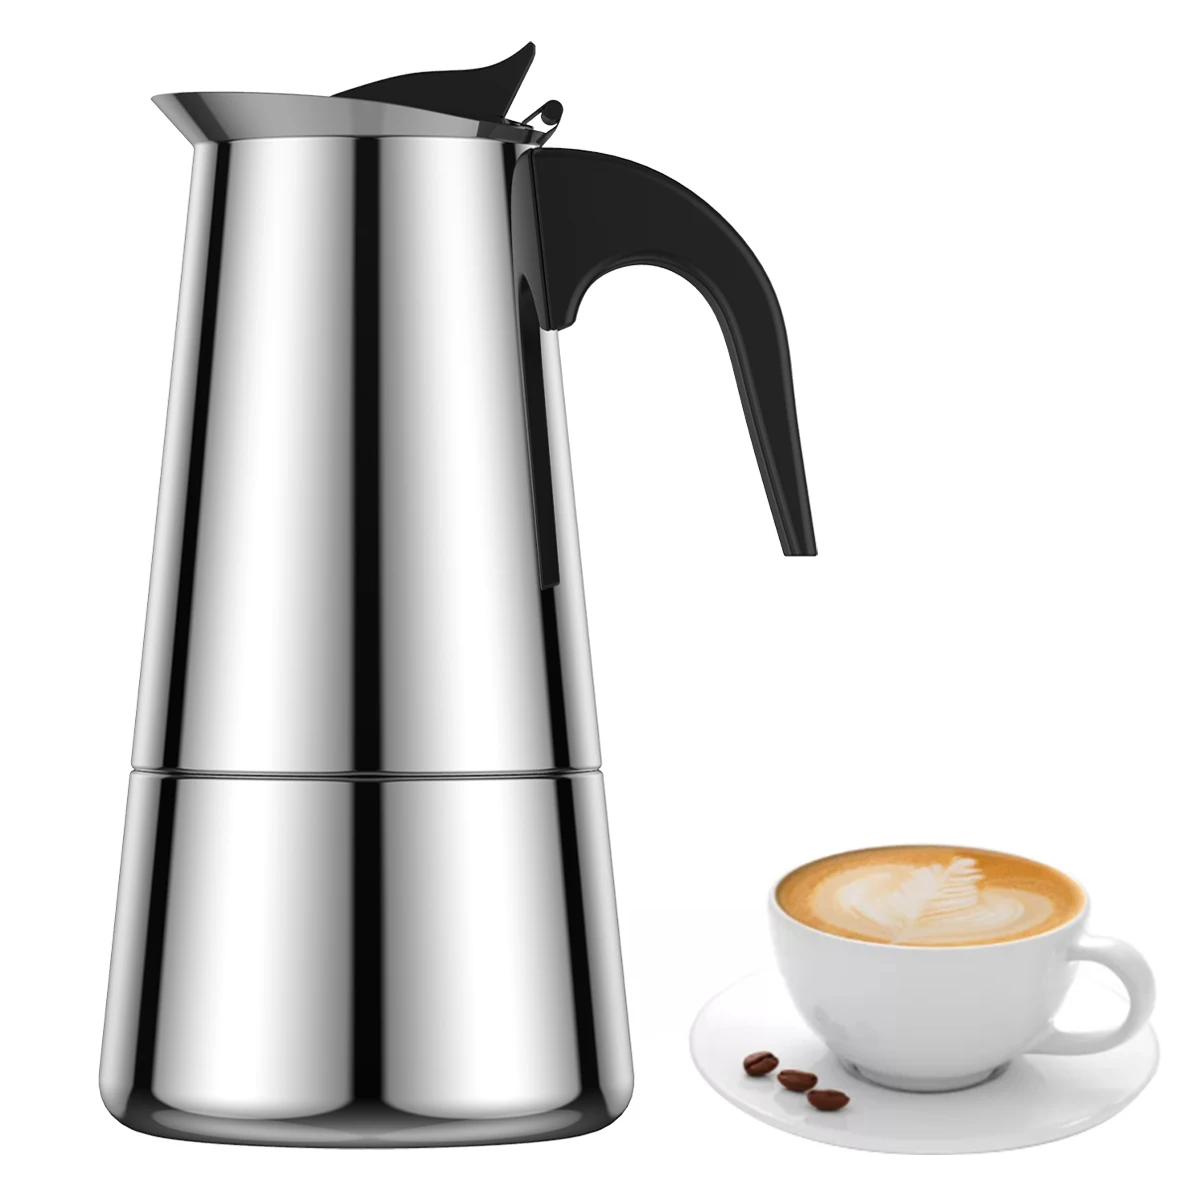 

Espresso Maker Induction Coffee Maker Stainless Steel Stovetop Coffee Maker Moka Pot 200ml/4 Cup Portable Coffee Maker Pot